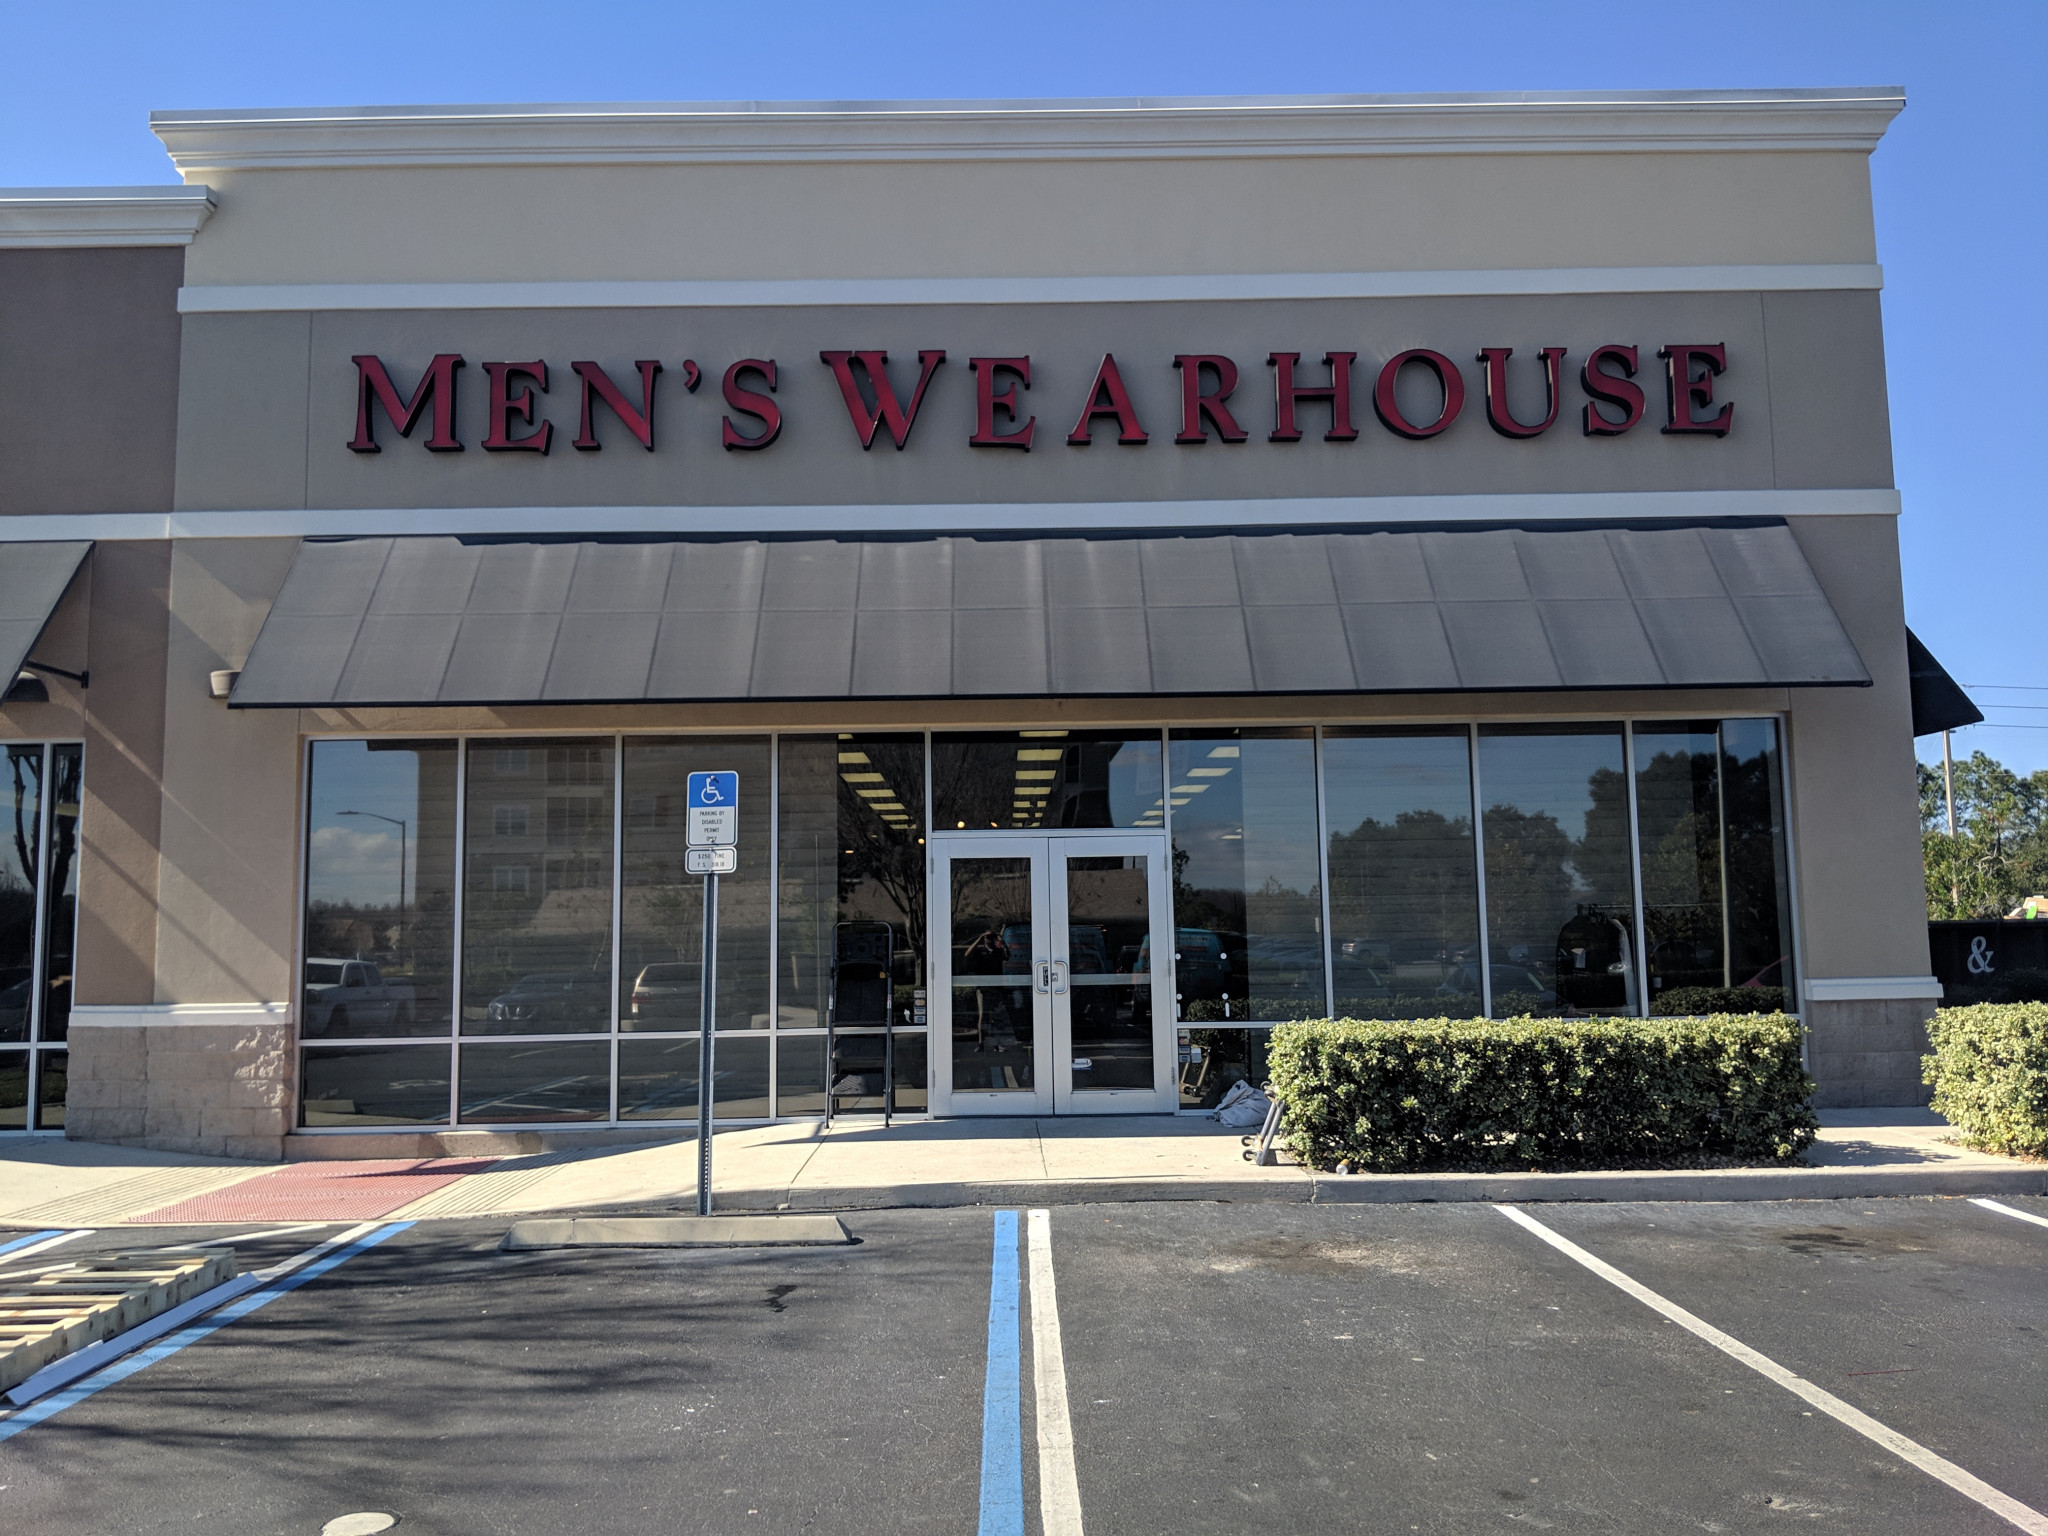 Commercial Window Tint Orlando for Men's Warehouse